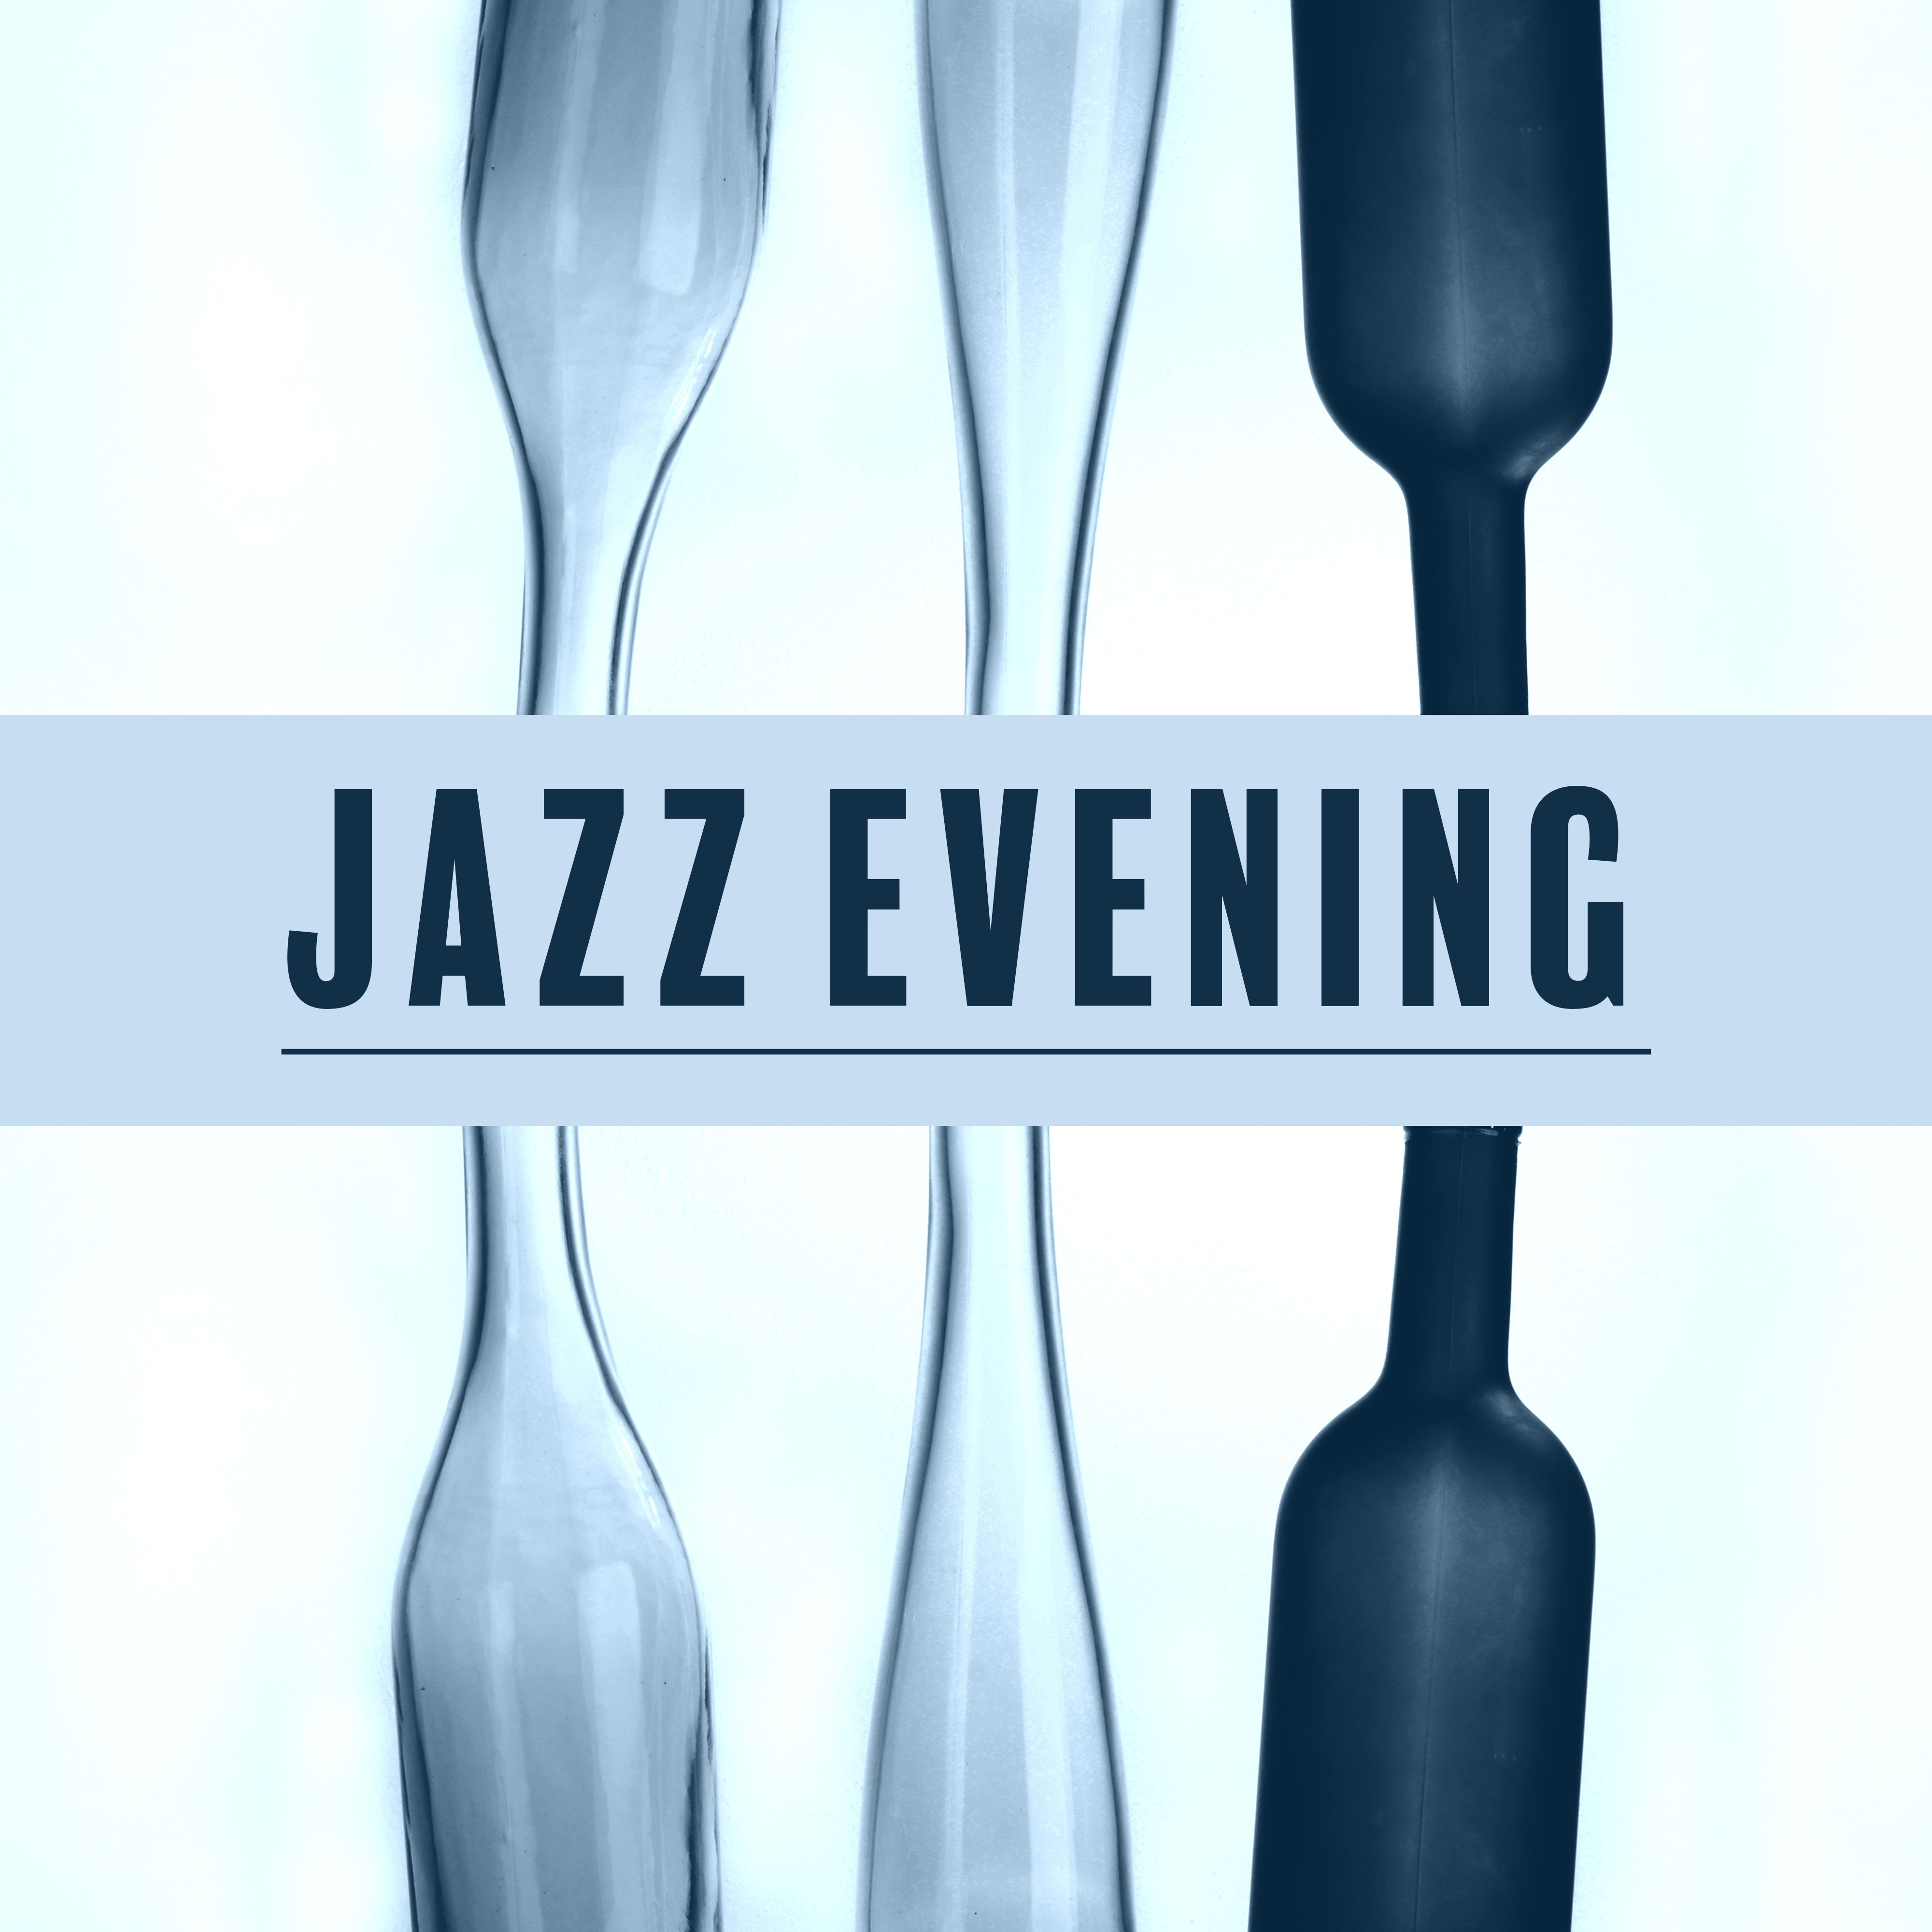 Jazz Evening – Late Night Music, Smooth Jazz for Relaxation, Gentle Guitar, Soothing Piano, Chilled Jazz, Calm Down, Peaceful Mind, Mellow Jazz